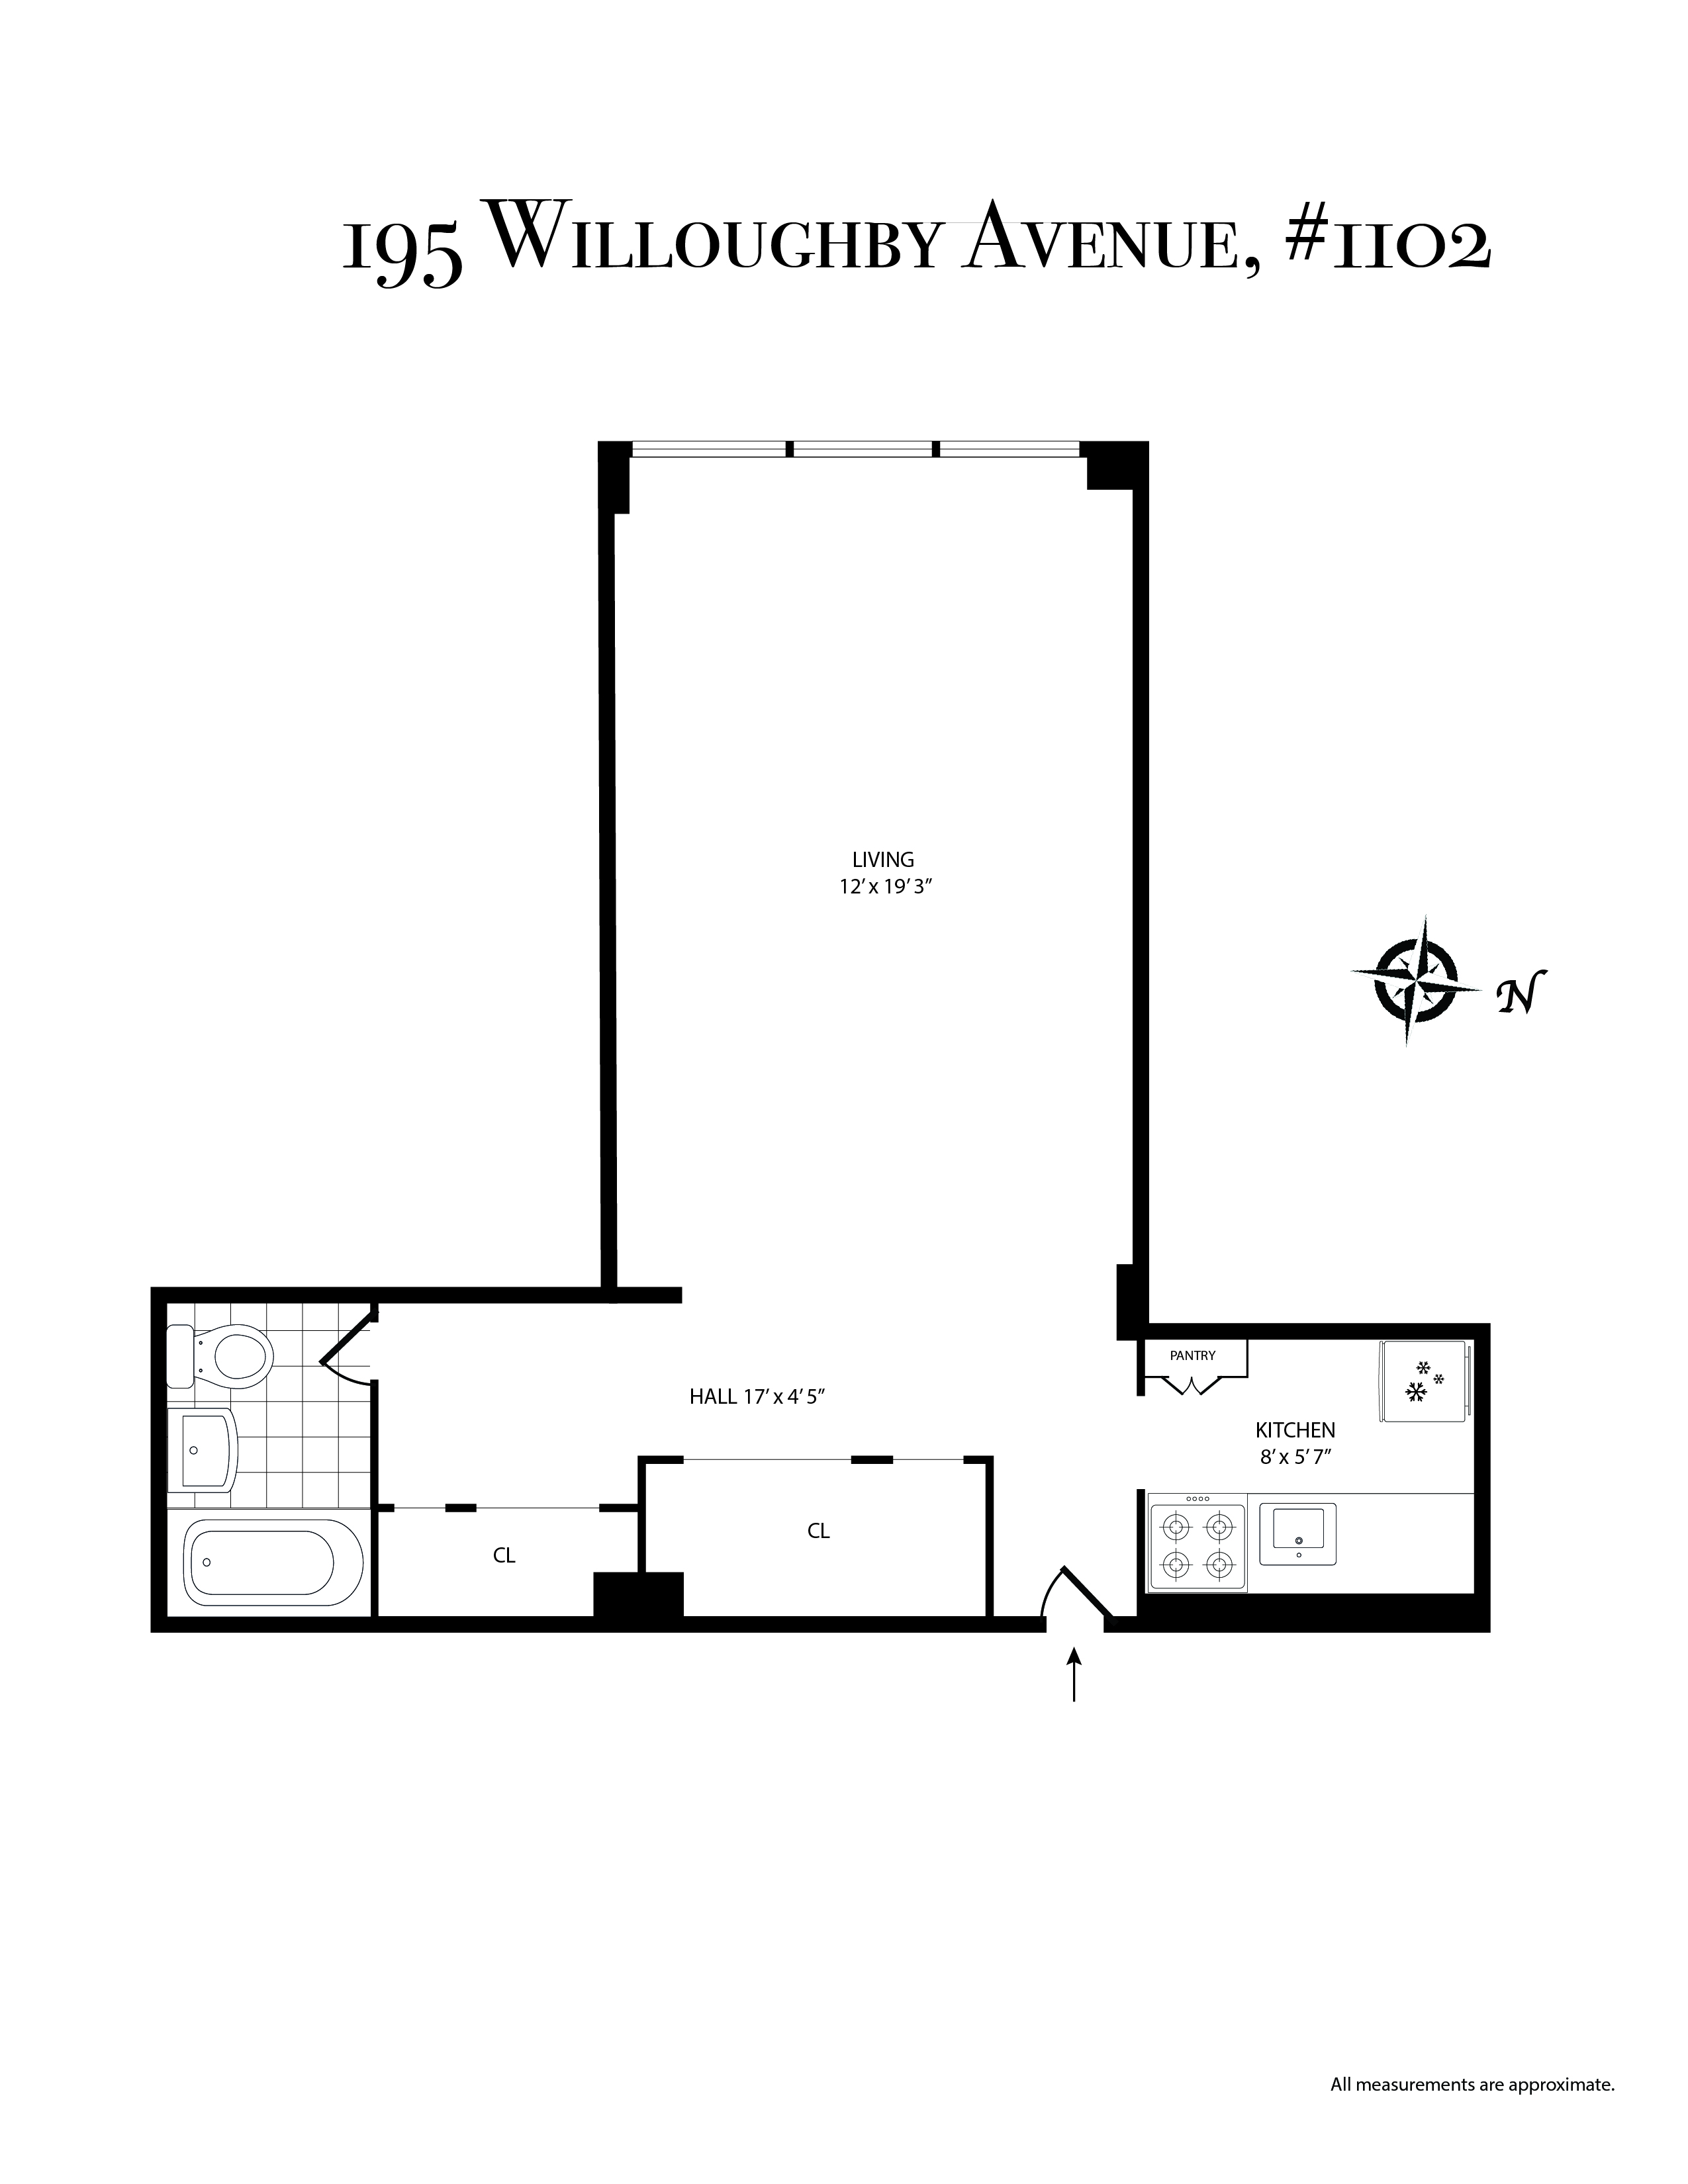 Floorplan of 195 Willoughby Ave